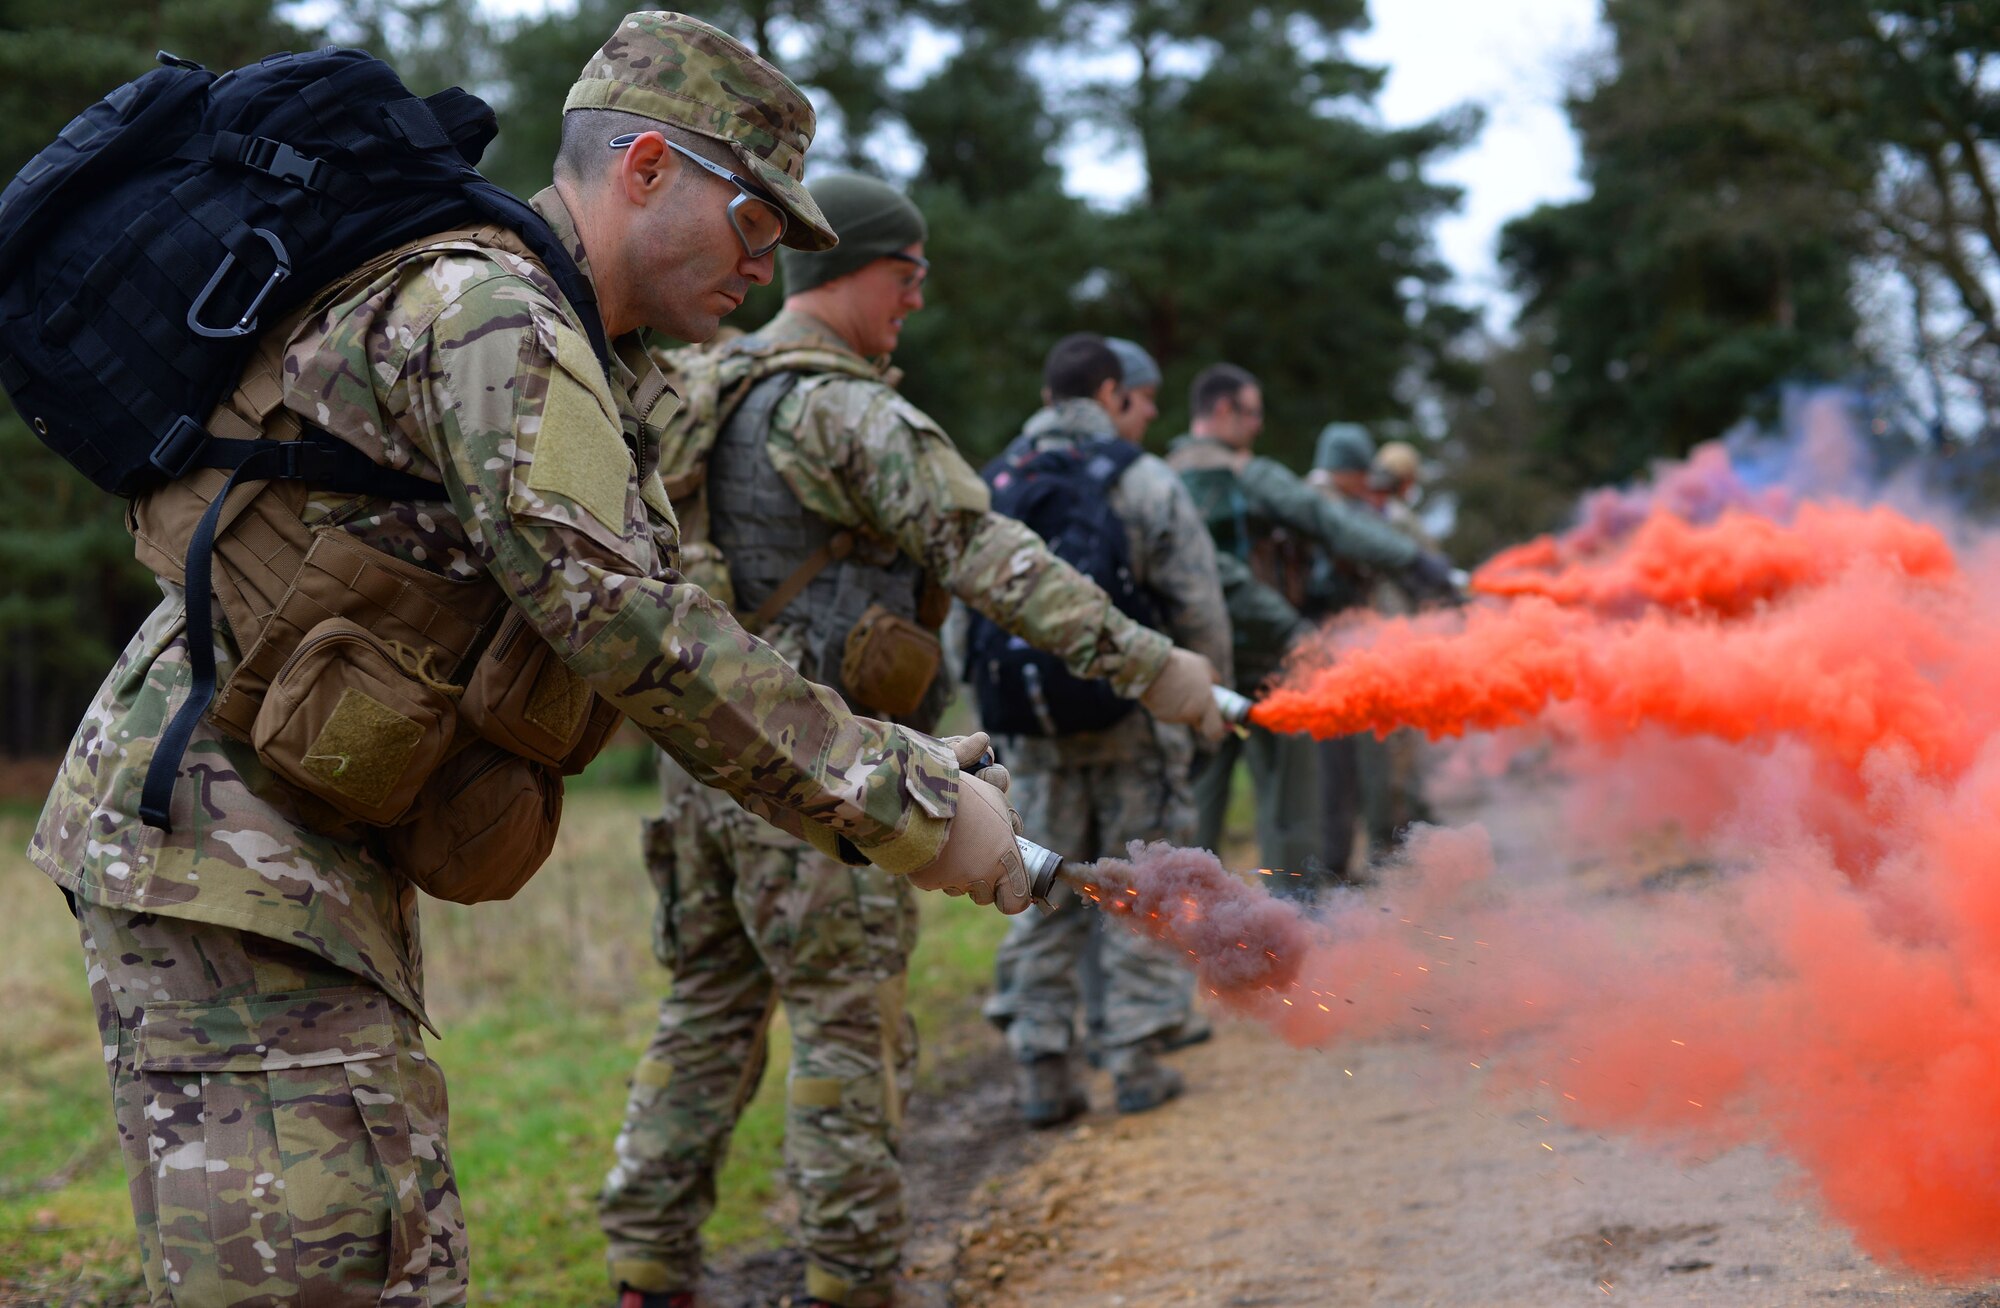 U.S. Air Force Airmen from the 100th Air Refueling Wing, and 352nd Special Operations Wing from RAF Mildenhall, England, and 48th Fighter Wing from RAF Lakenheath, England, test smoke bombs March 8, 2017, at the Stanford Training Area, England. Every three years the Airmen must undergo survival, evasion, resistance and escape training to maintain proficiency. (U.S. Air Force photo by Senior Airman Christine Halan)